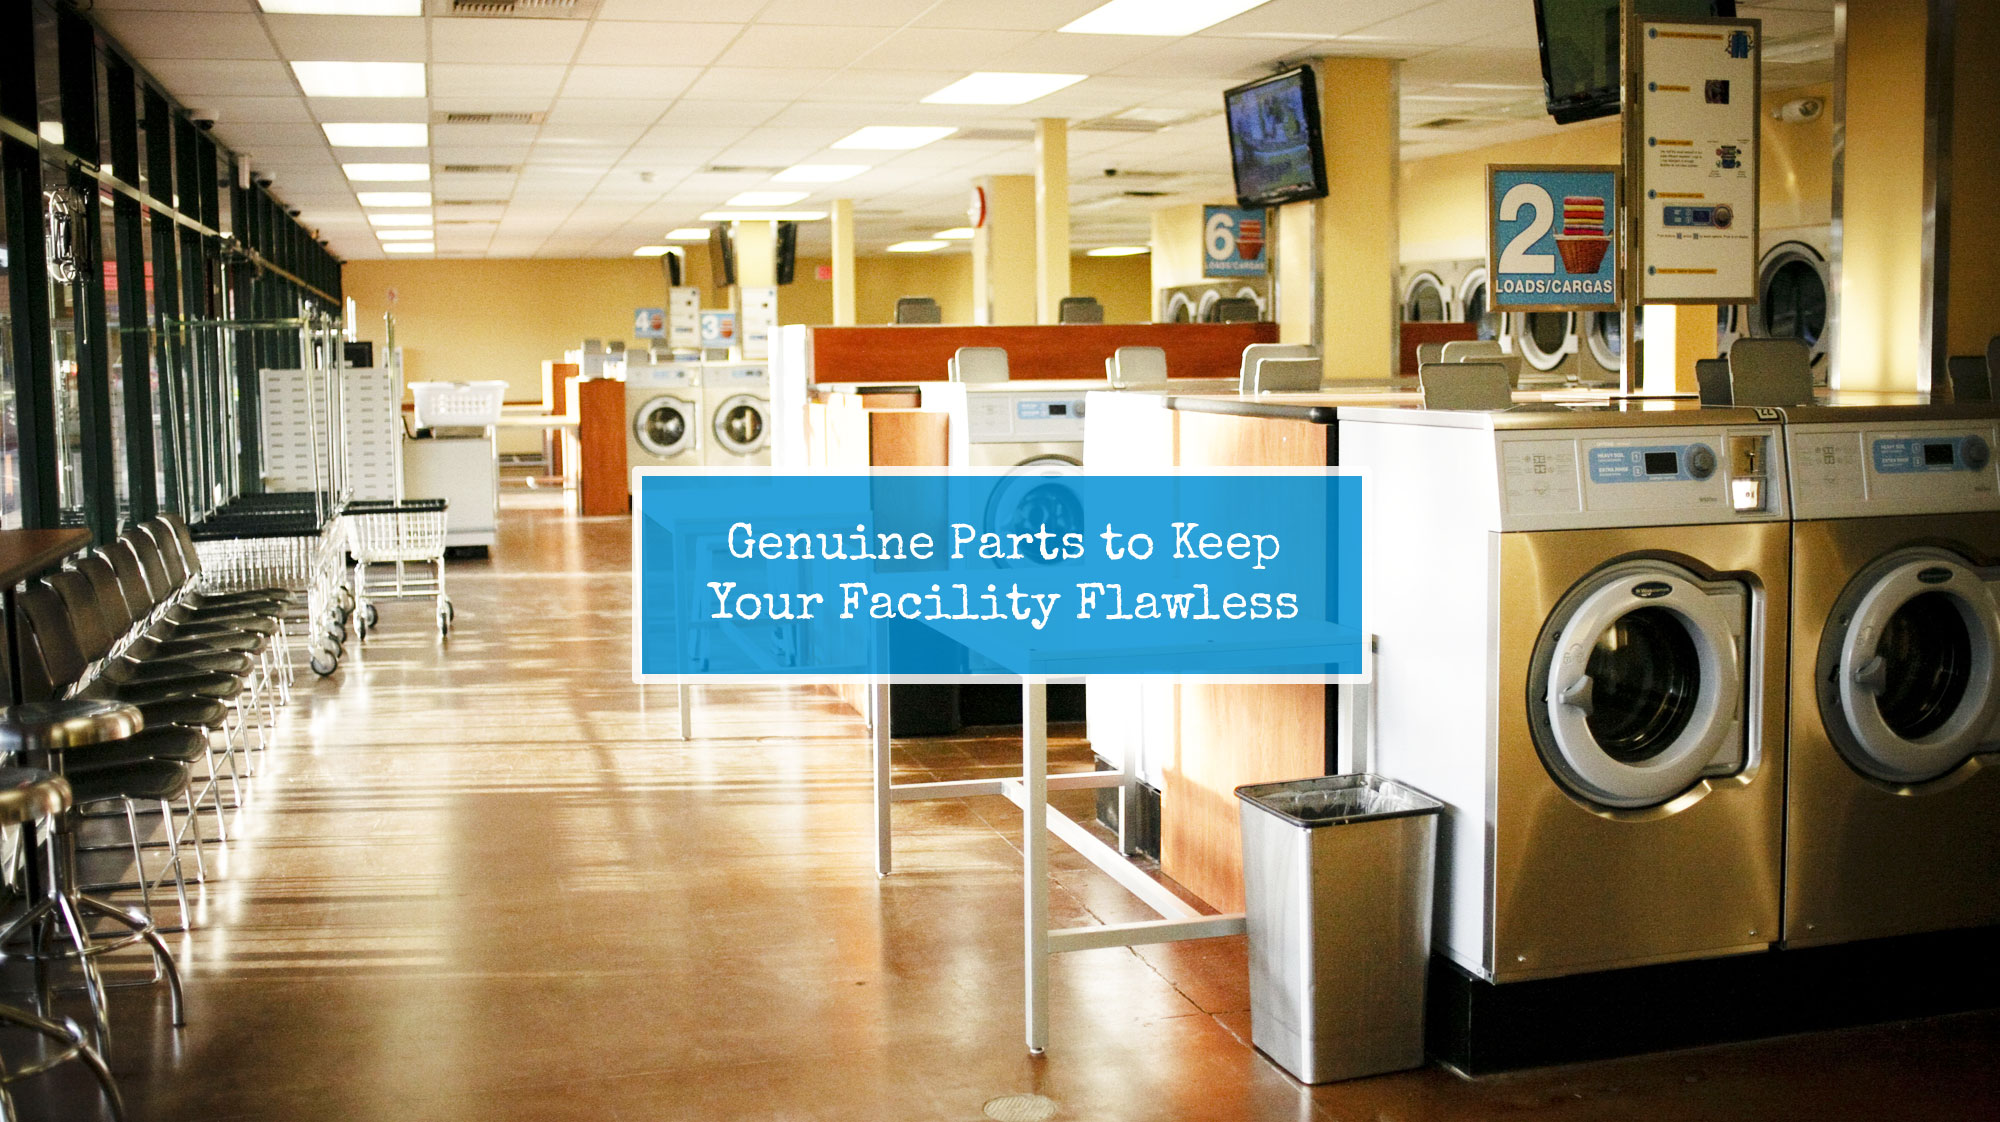 Genuine Parts to Keep Your Facility Flawless